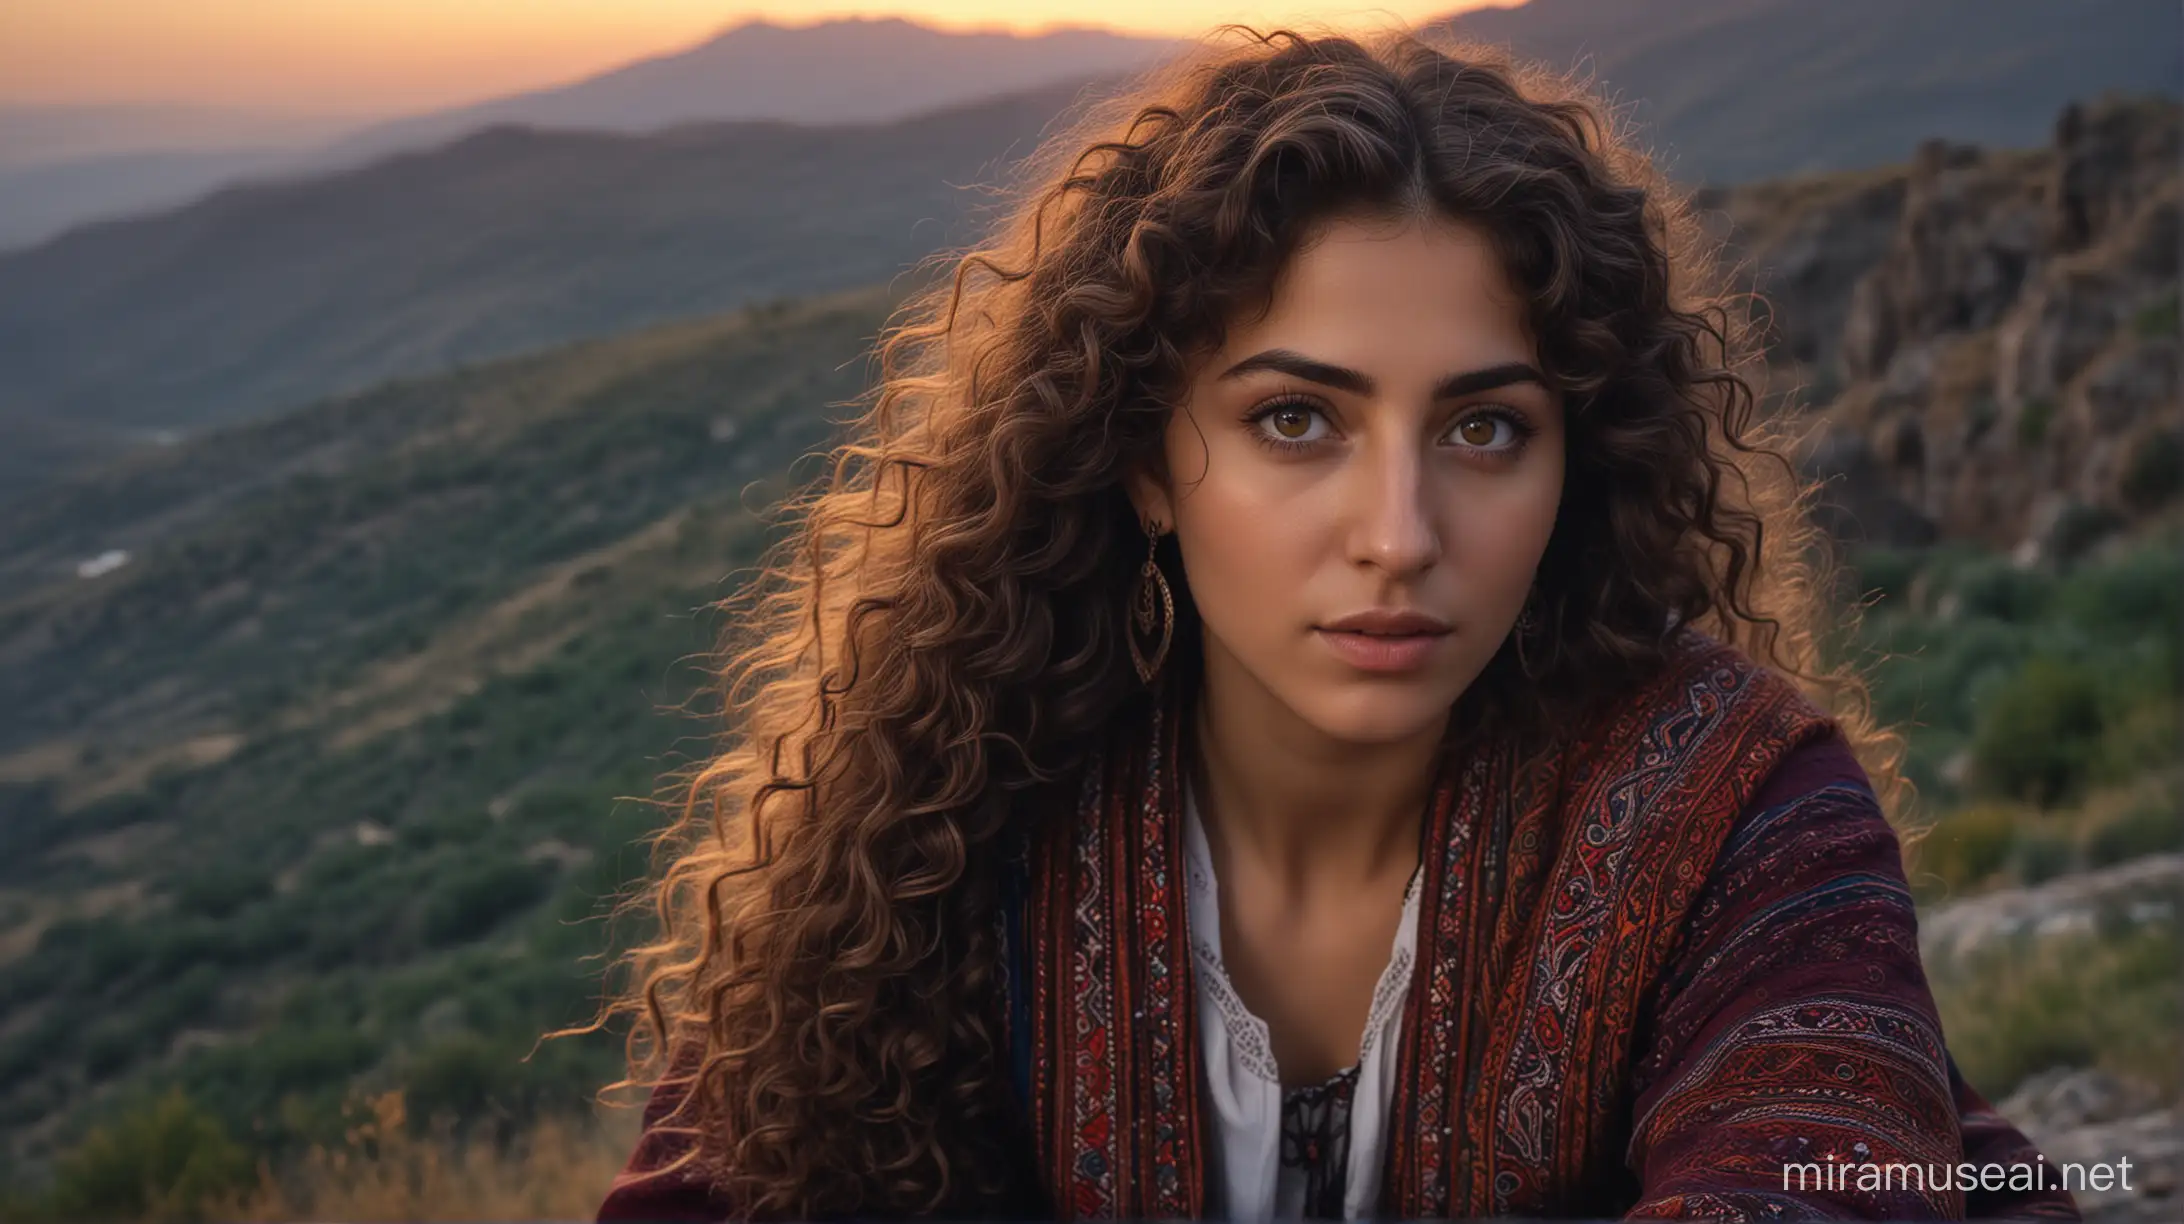 Armenian Woman in Traditional Attire at Sunset Mountains